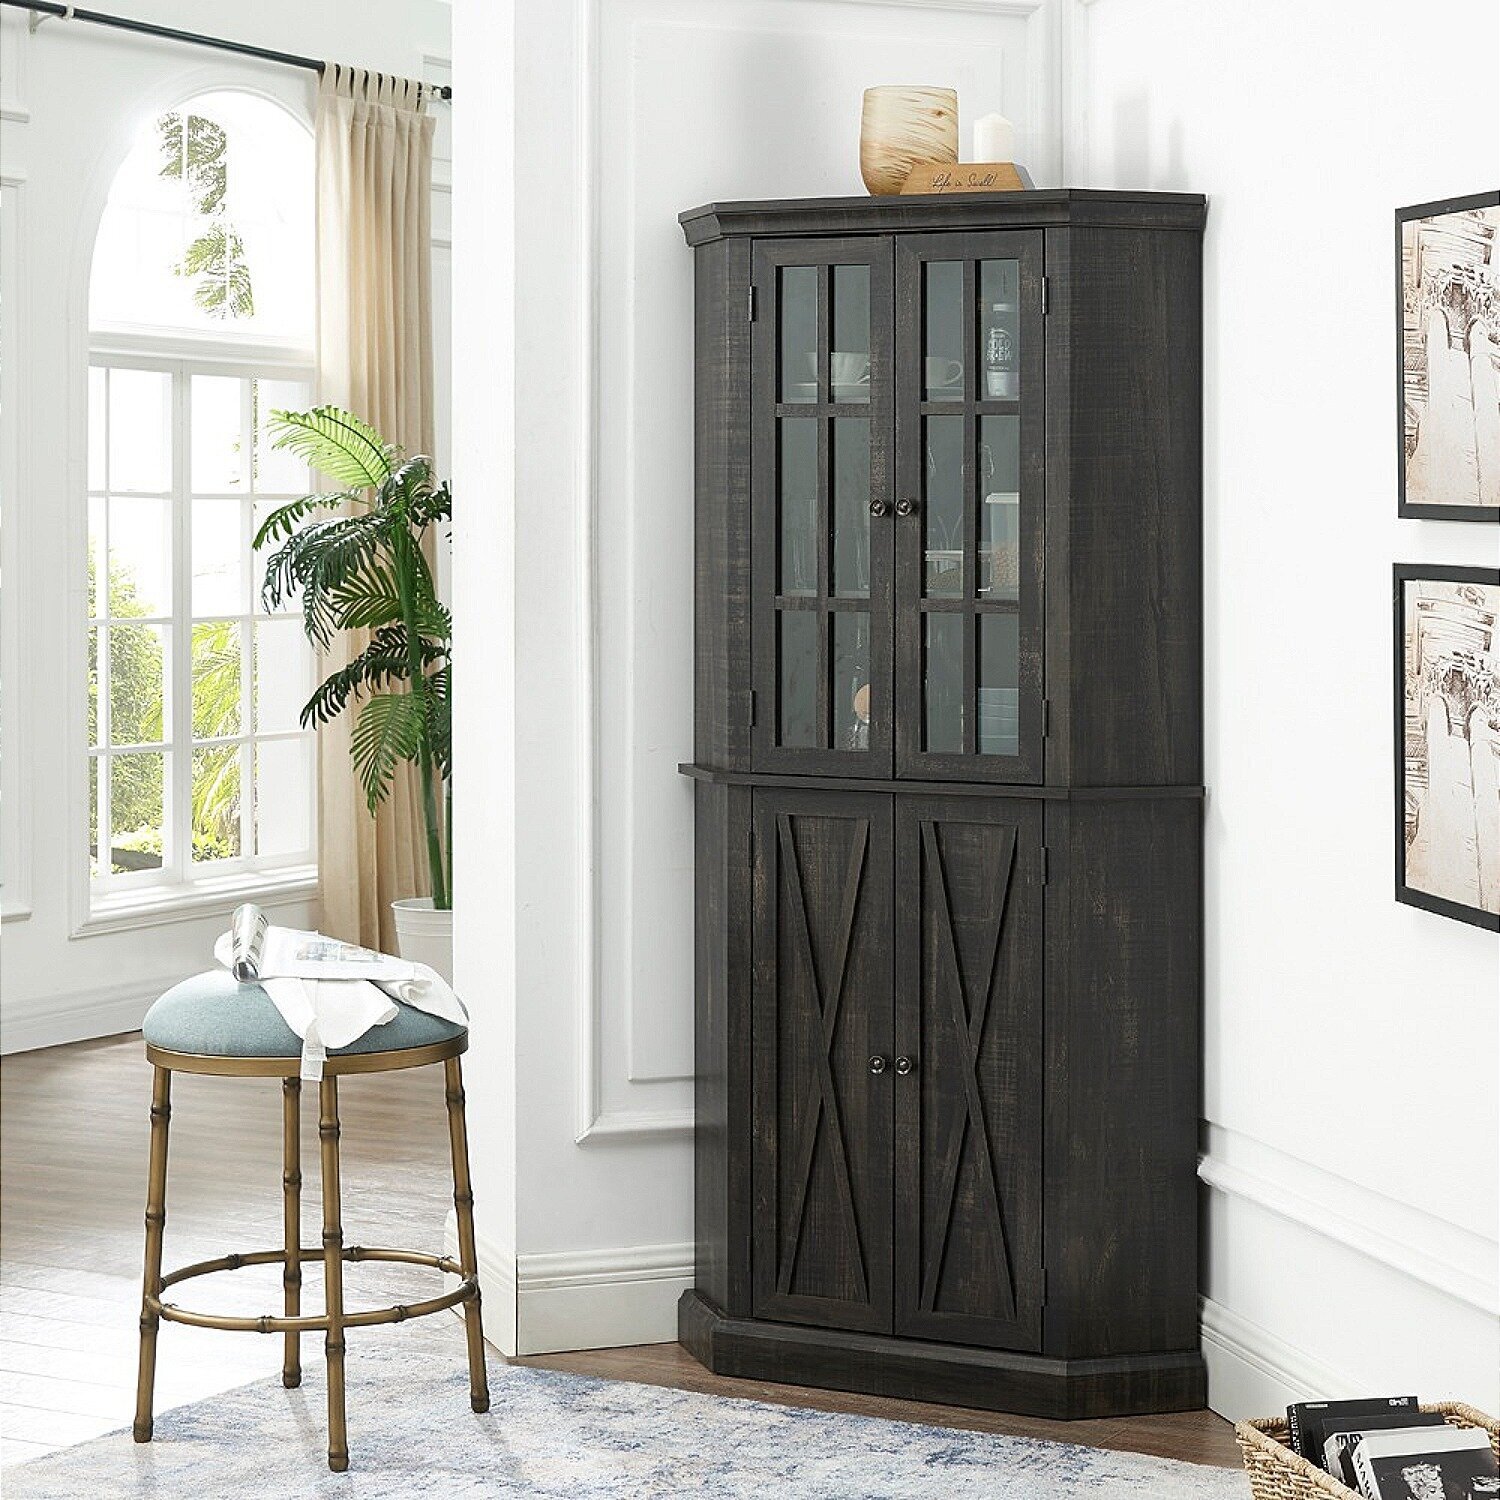 Vintage Inspired Tall Corner Cabinet with Doors